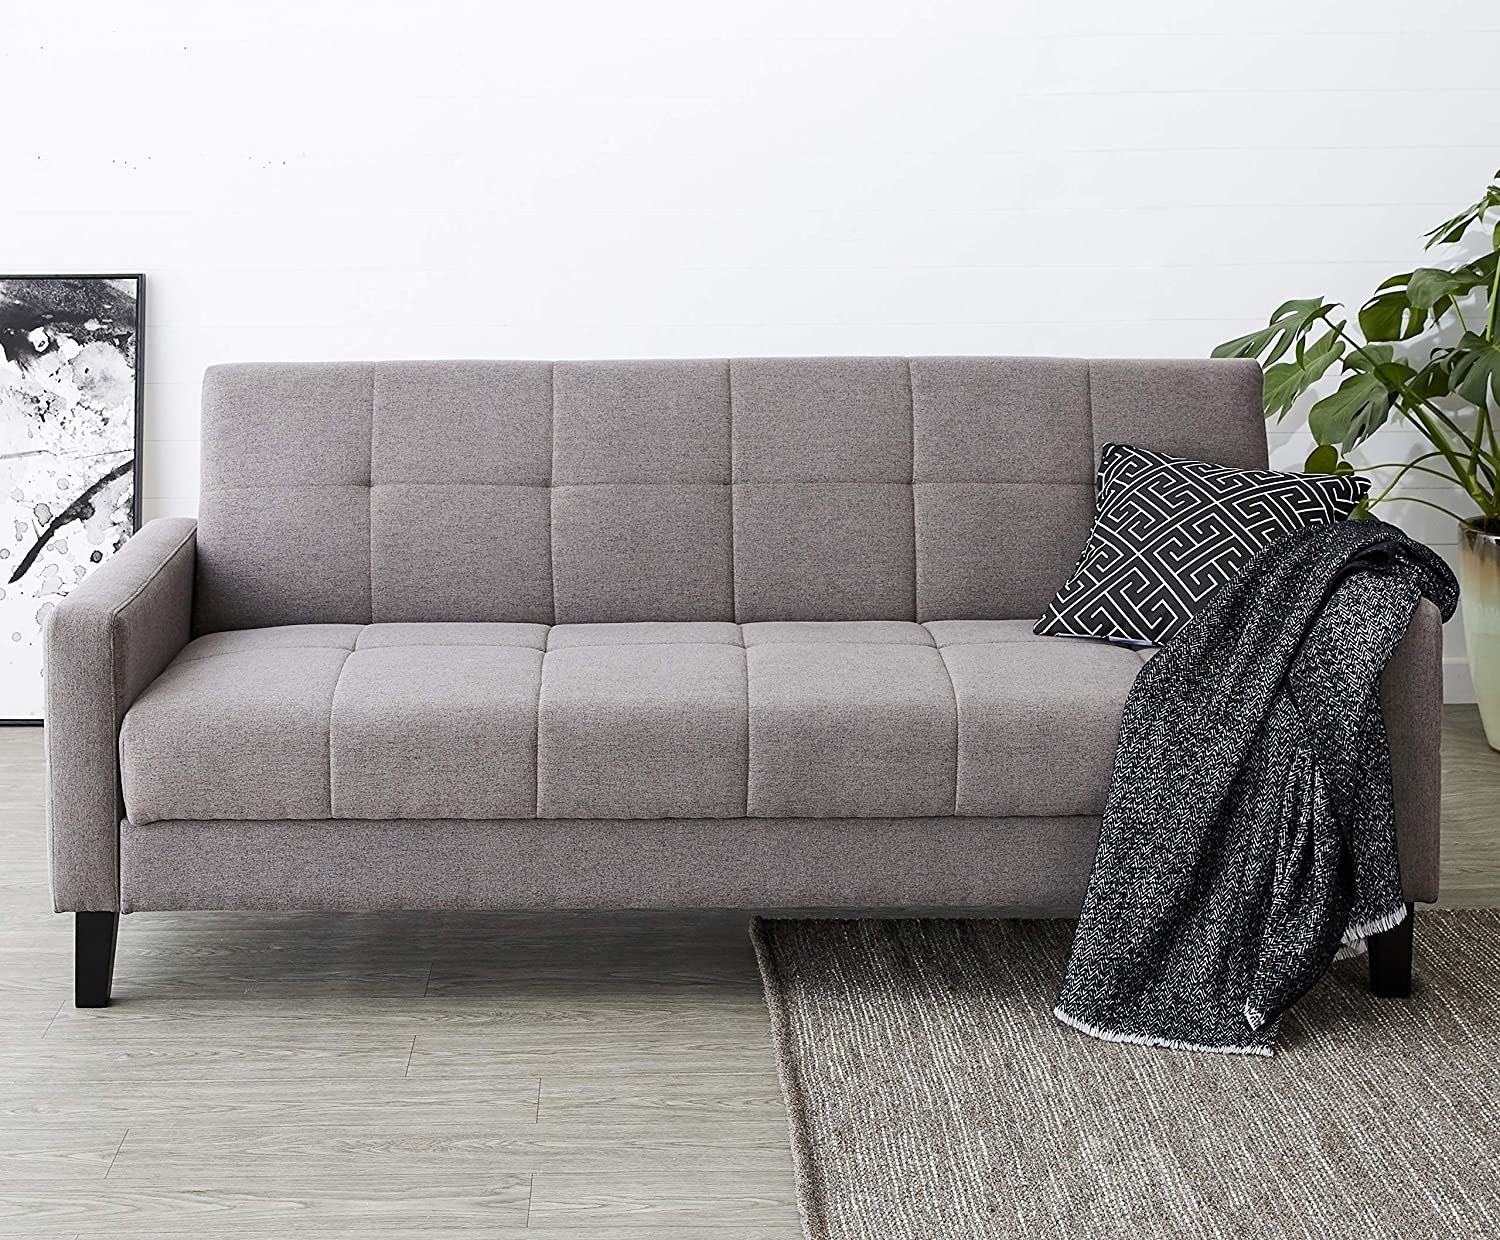 A grey sofa with a pillow and a blanket on it